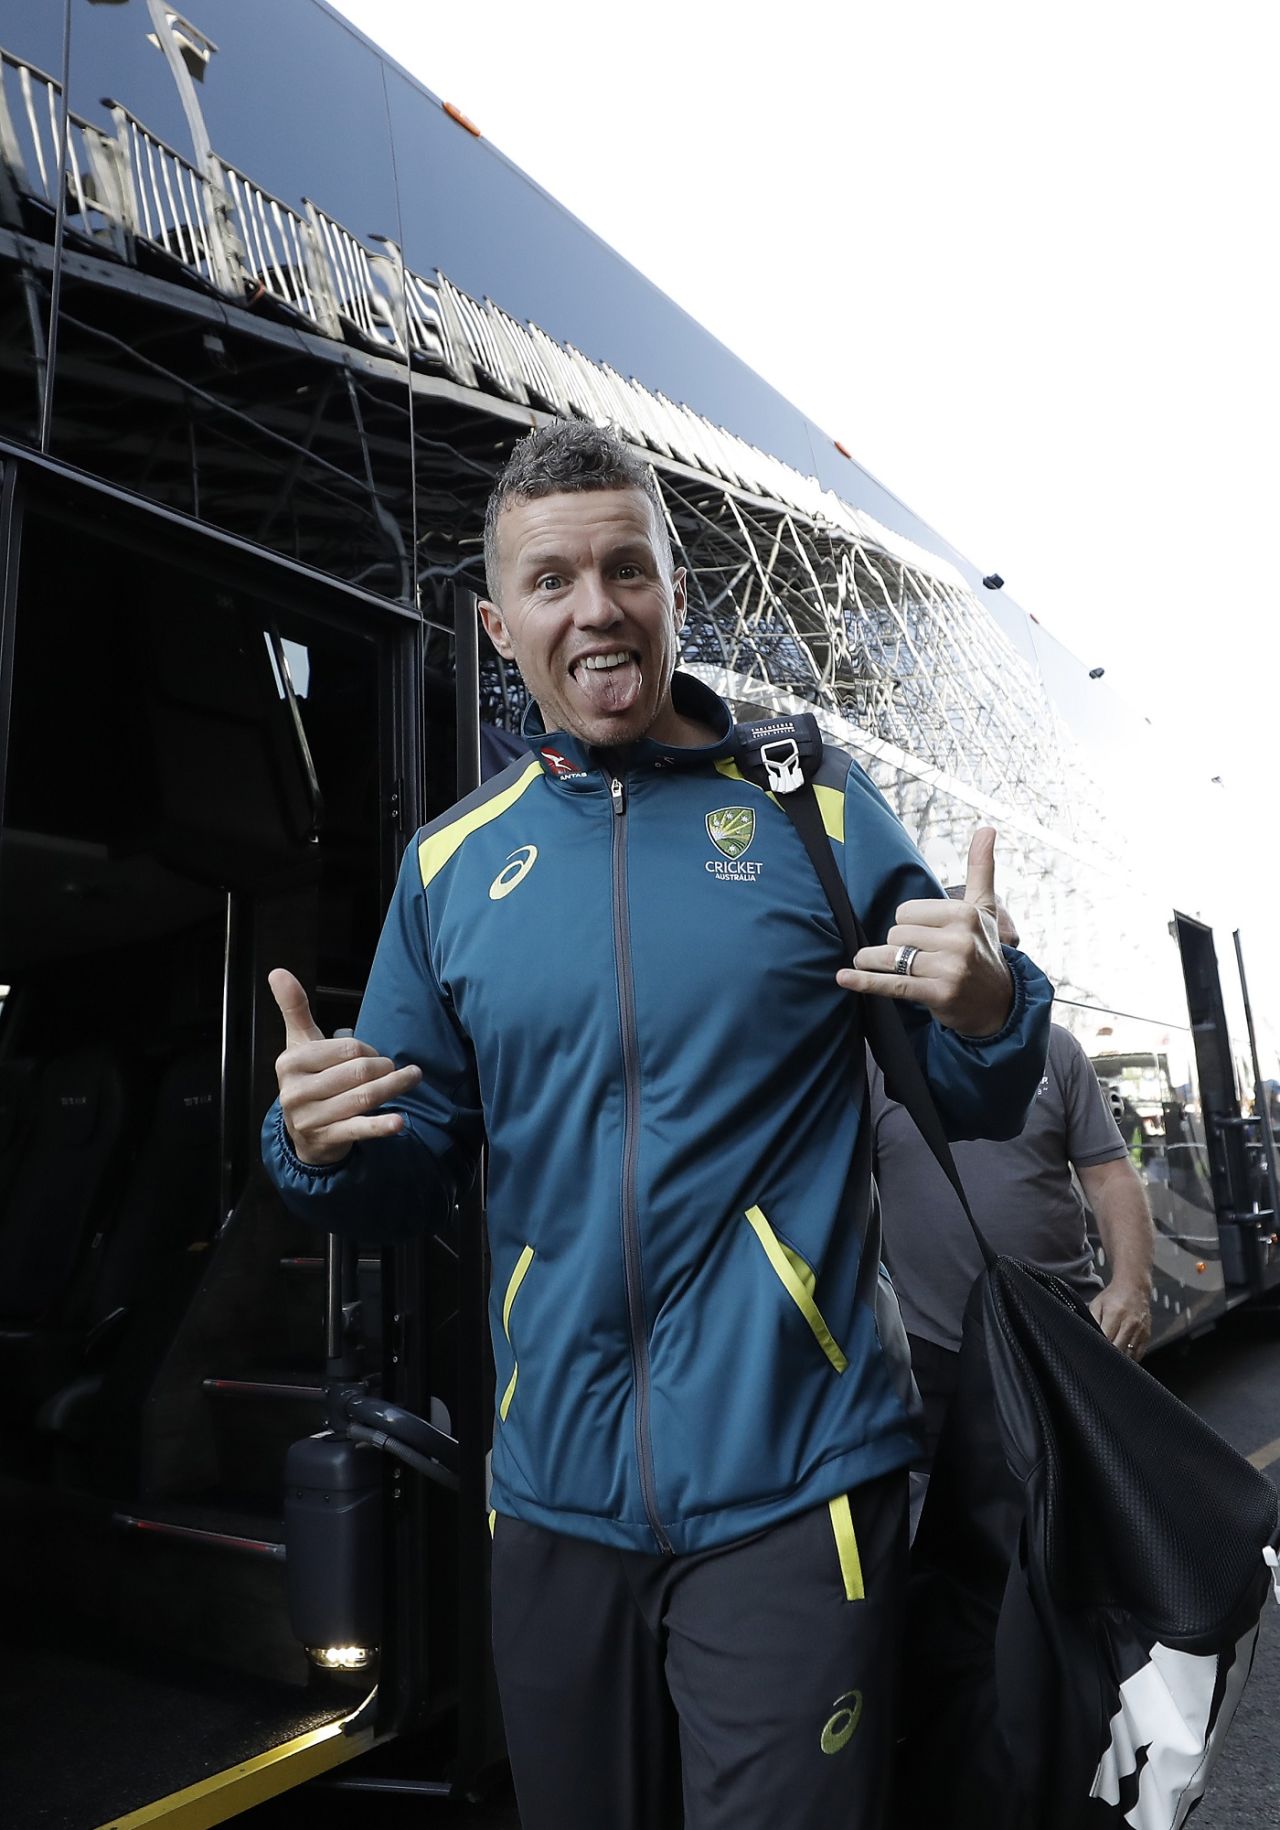 Peter Siddle sees the funny side of... life? cricket? his gear?, England v Australia, 4th Ashes Test, Old Trafford, Manchester, Day 5, September 8, 2019